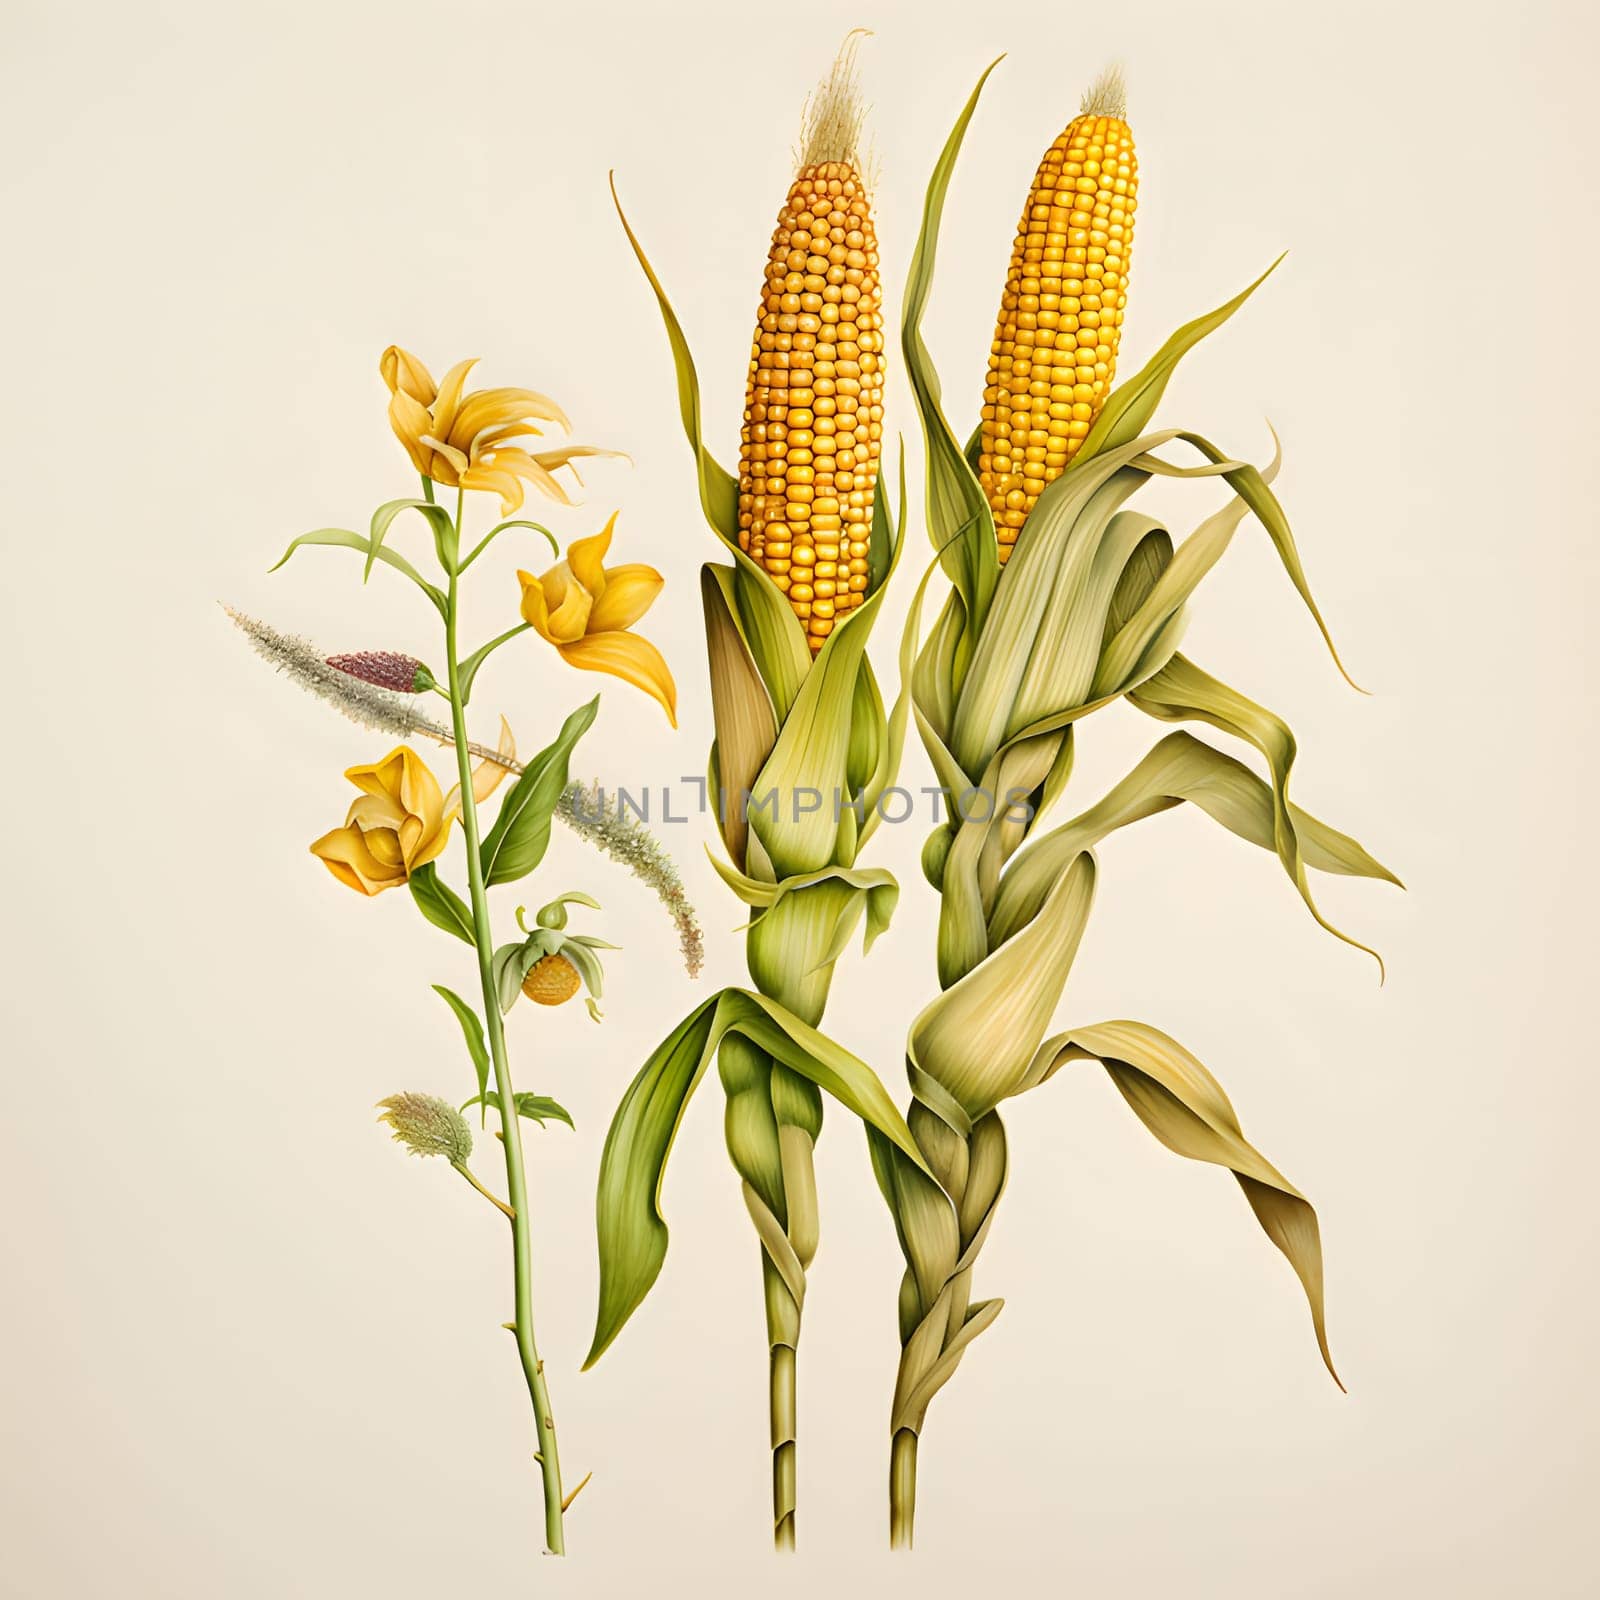 Corn cob with a flower isolated on a solid light background. Corn as a dish of thanksgiving for the harvest. An atmosphere of joy and celebration.